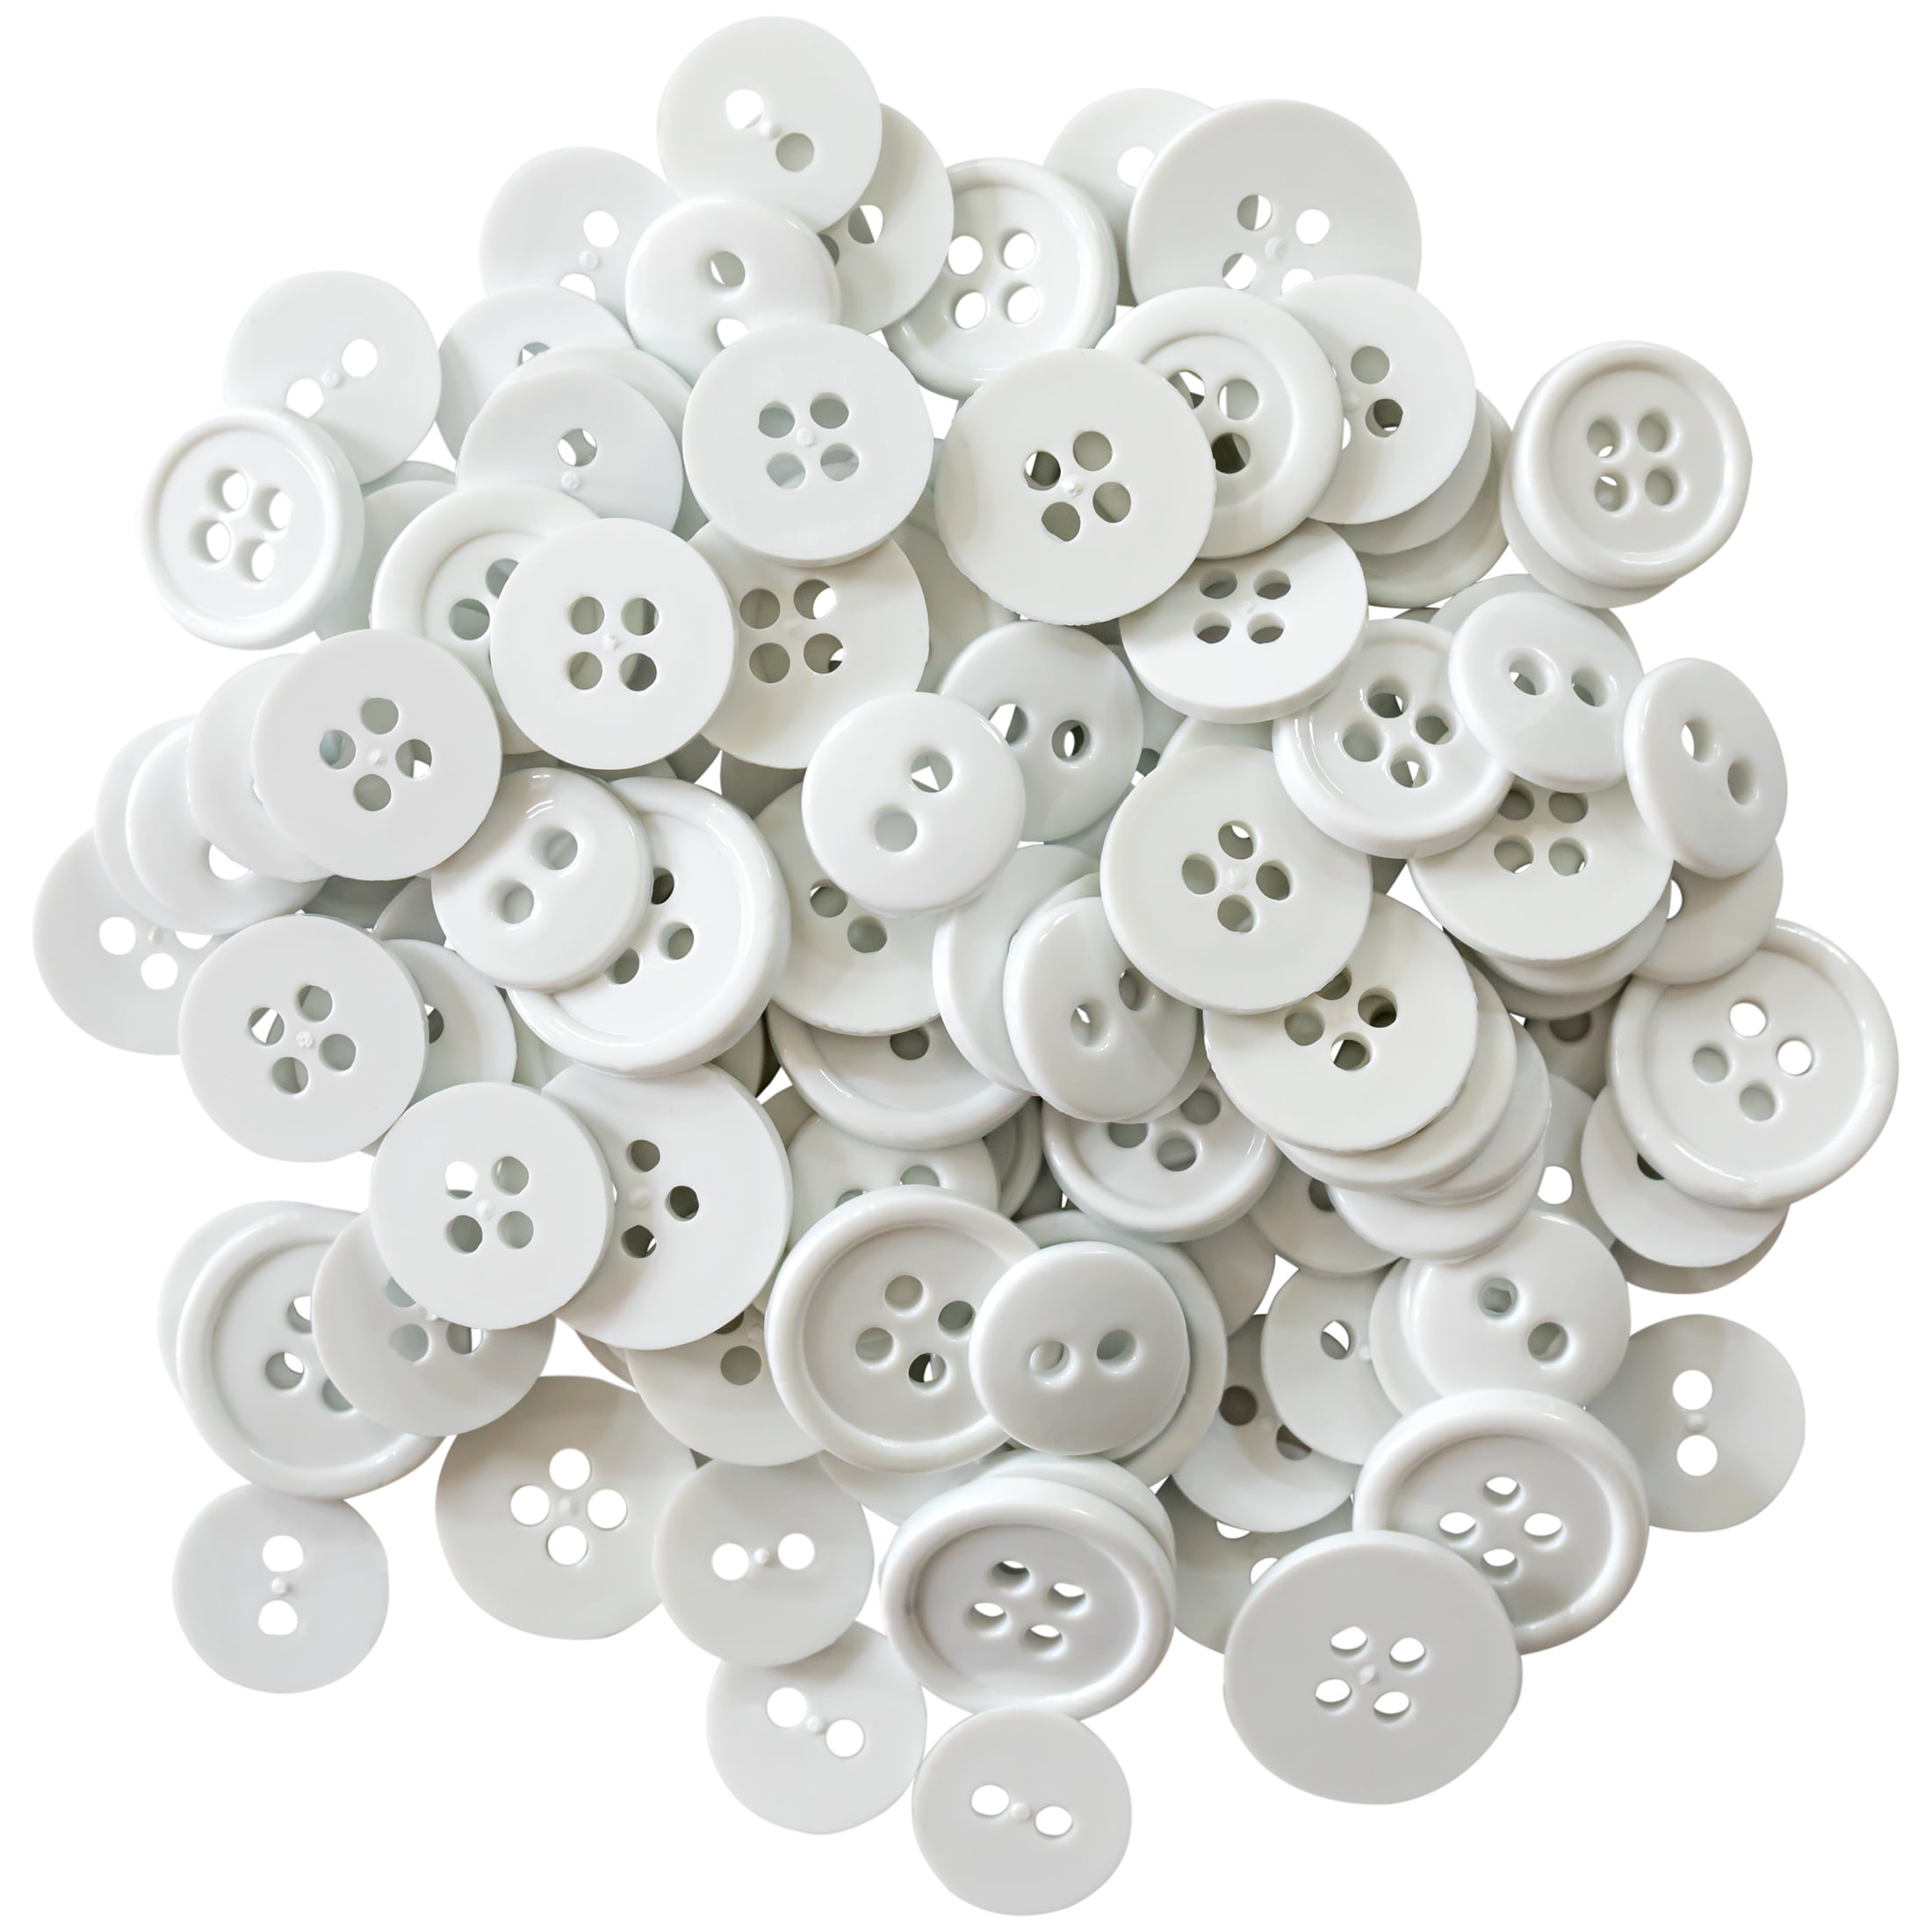 Favorite Findings White 1 3/8 4-Hole Big Buttons, 6 Pieces